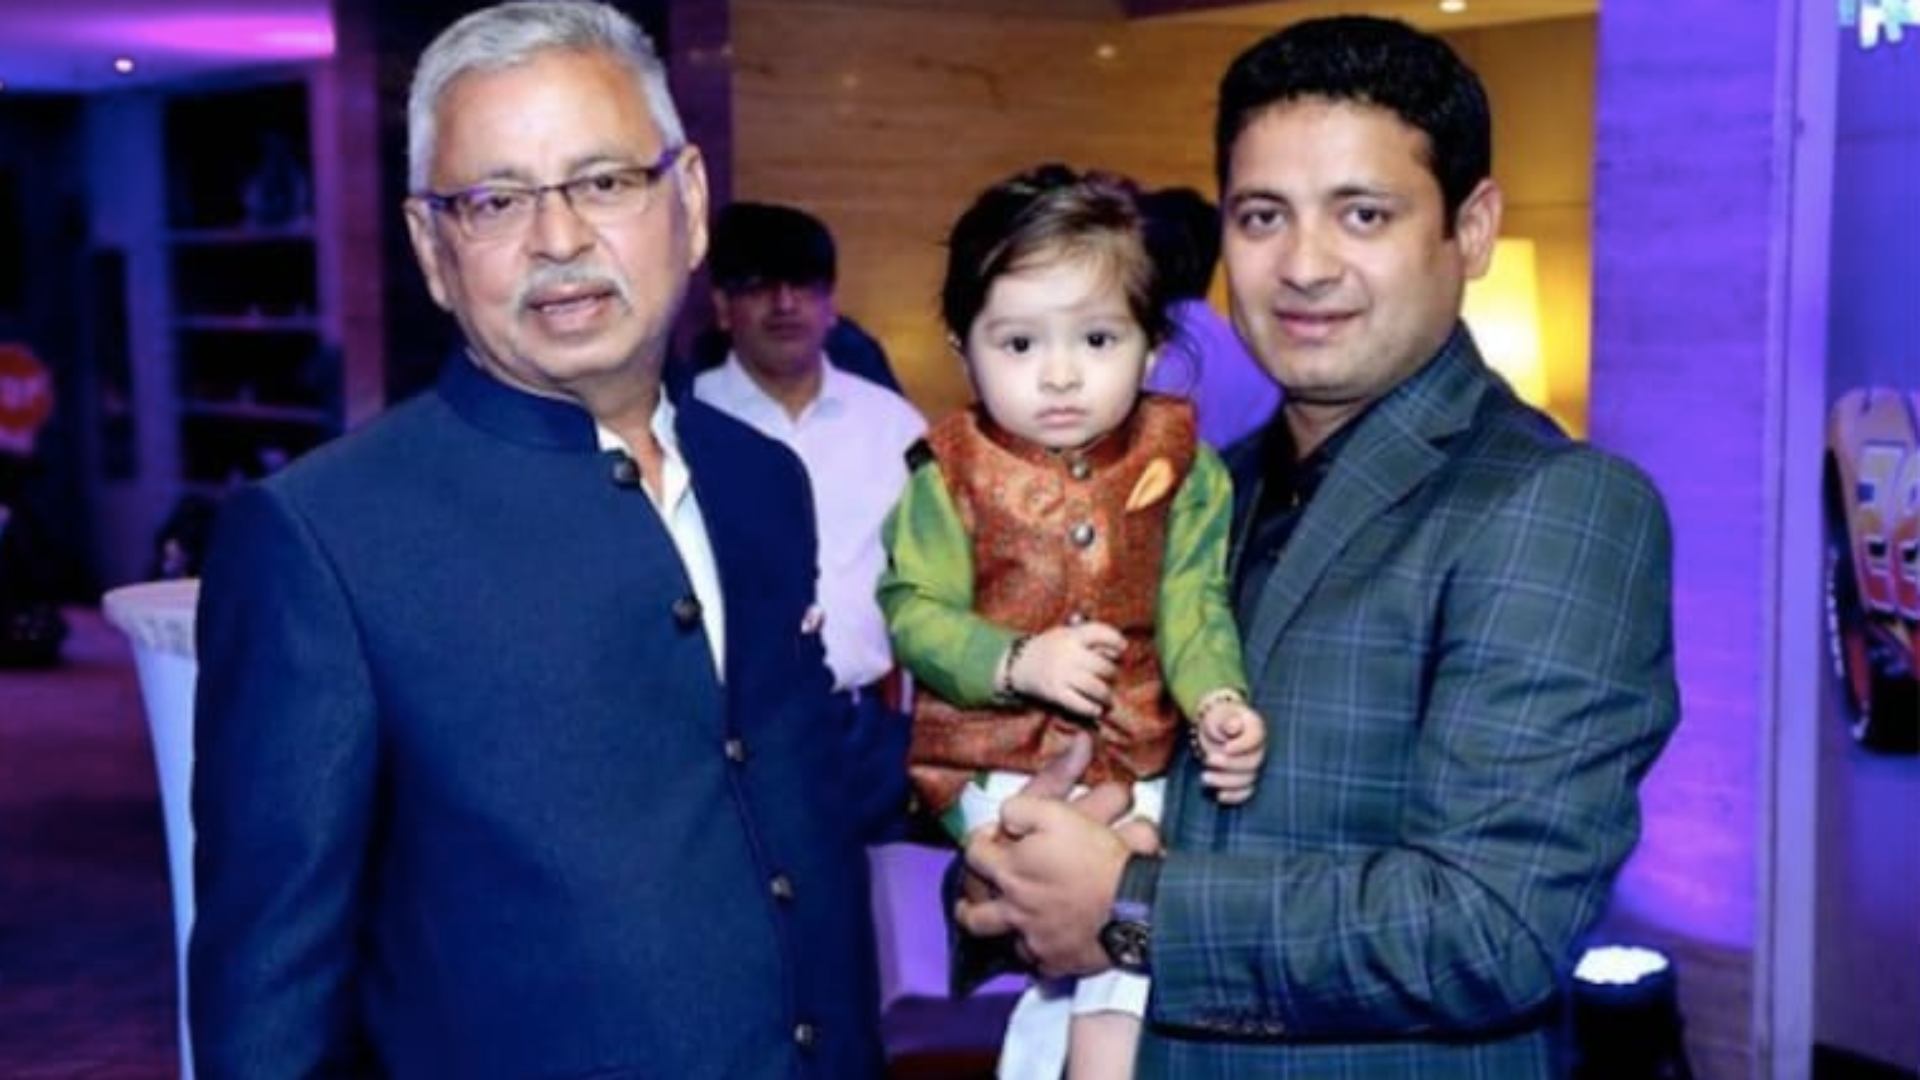 Piyush Chawla's father passes way due to COVID-19. (Image credit: Instagram)